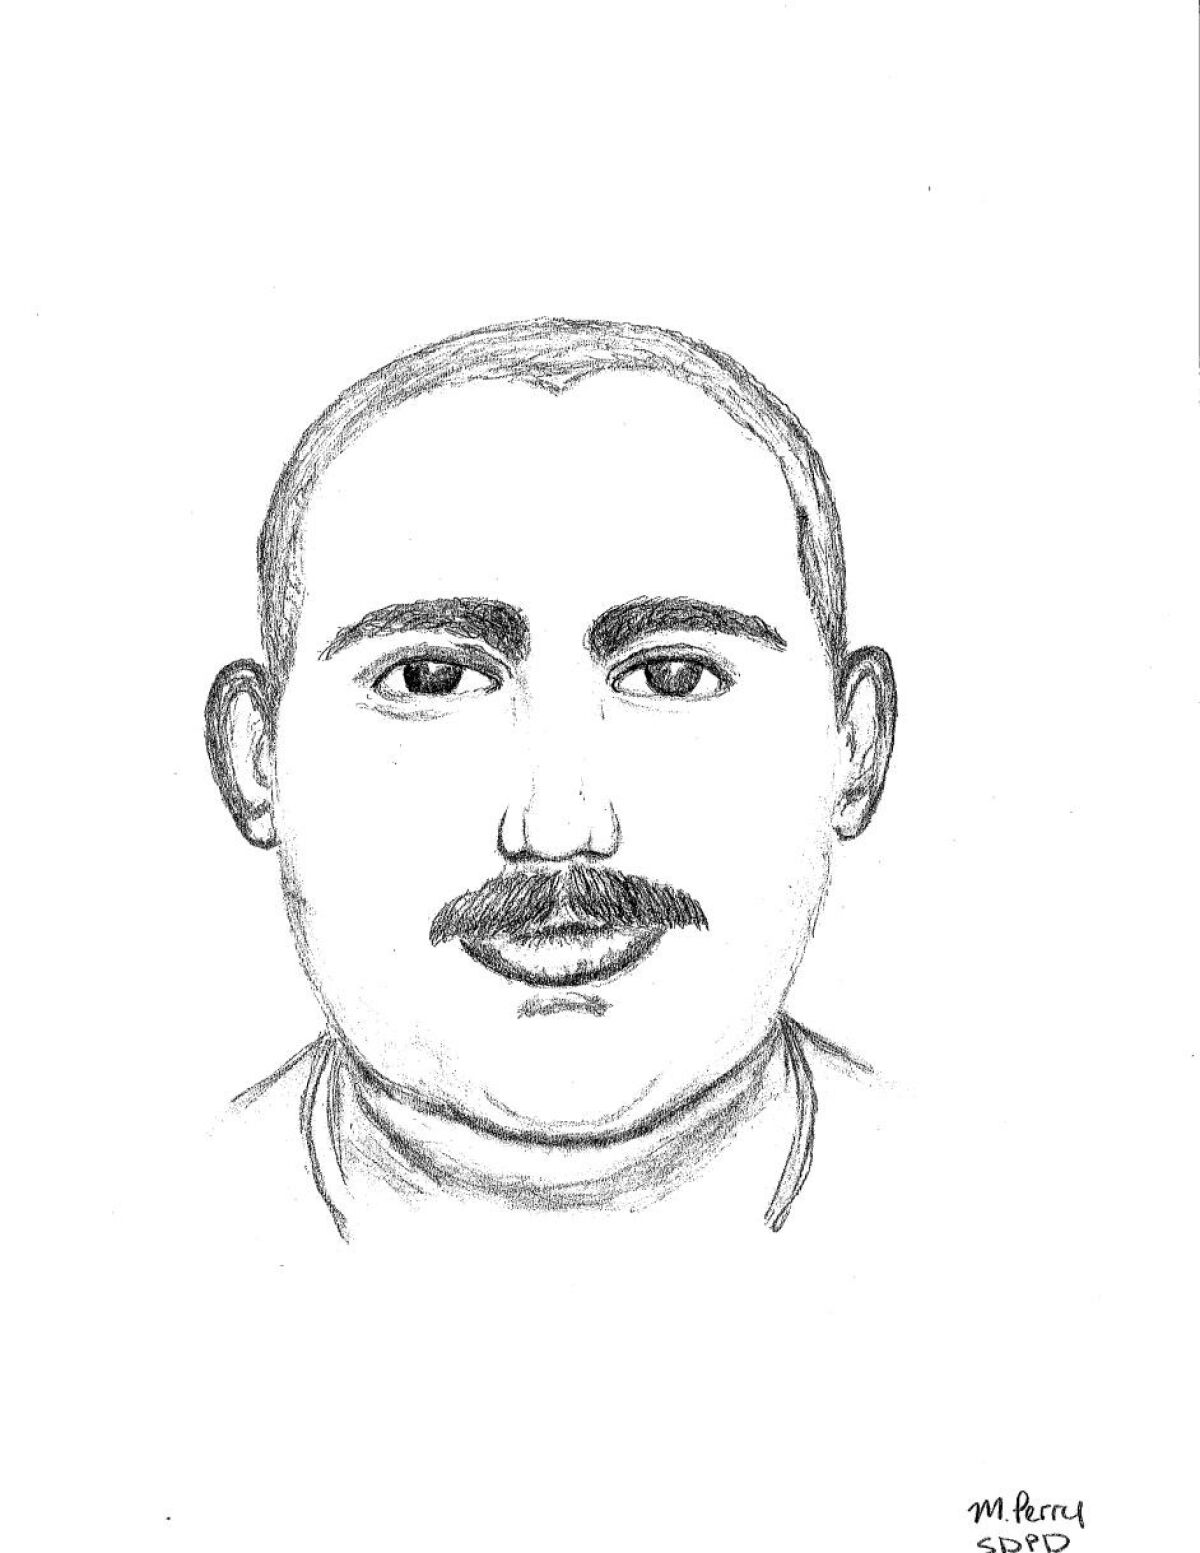 A sketch of suspect who abducted, sexually assaulted a woman Saturday morning in Pacific Beach's Crown Point neighborhood.